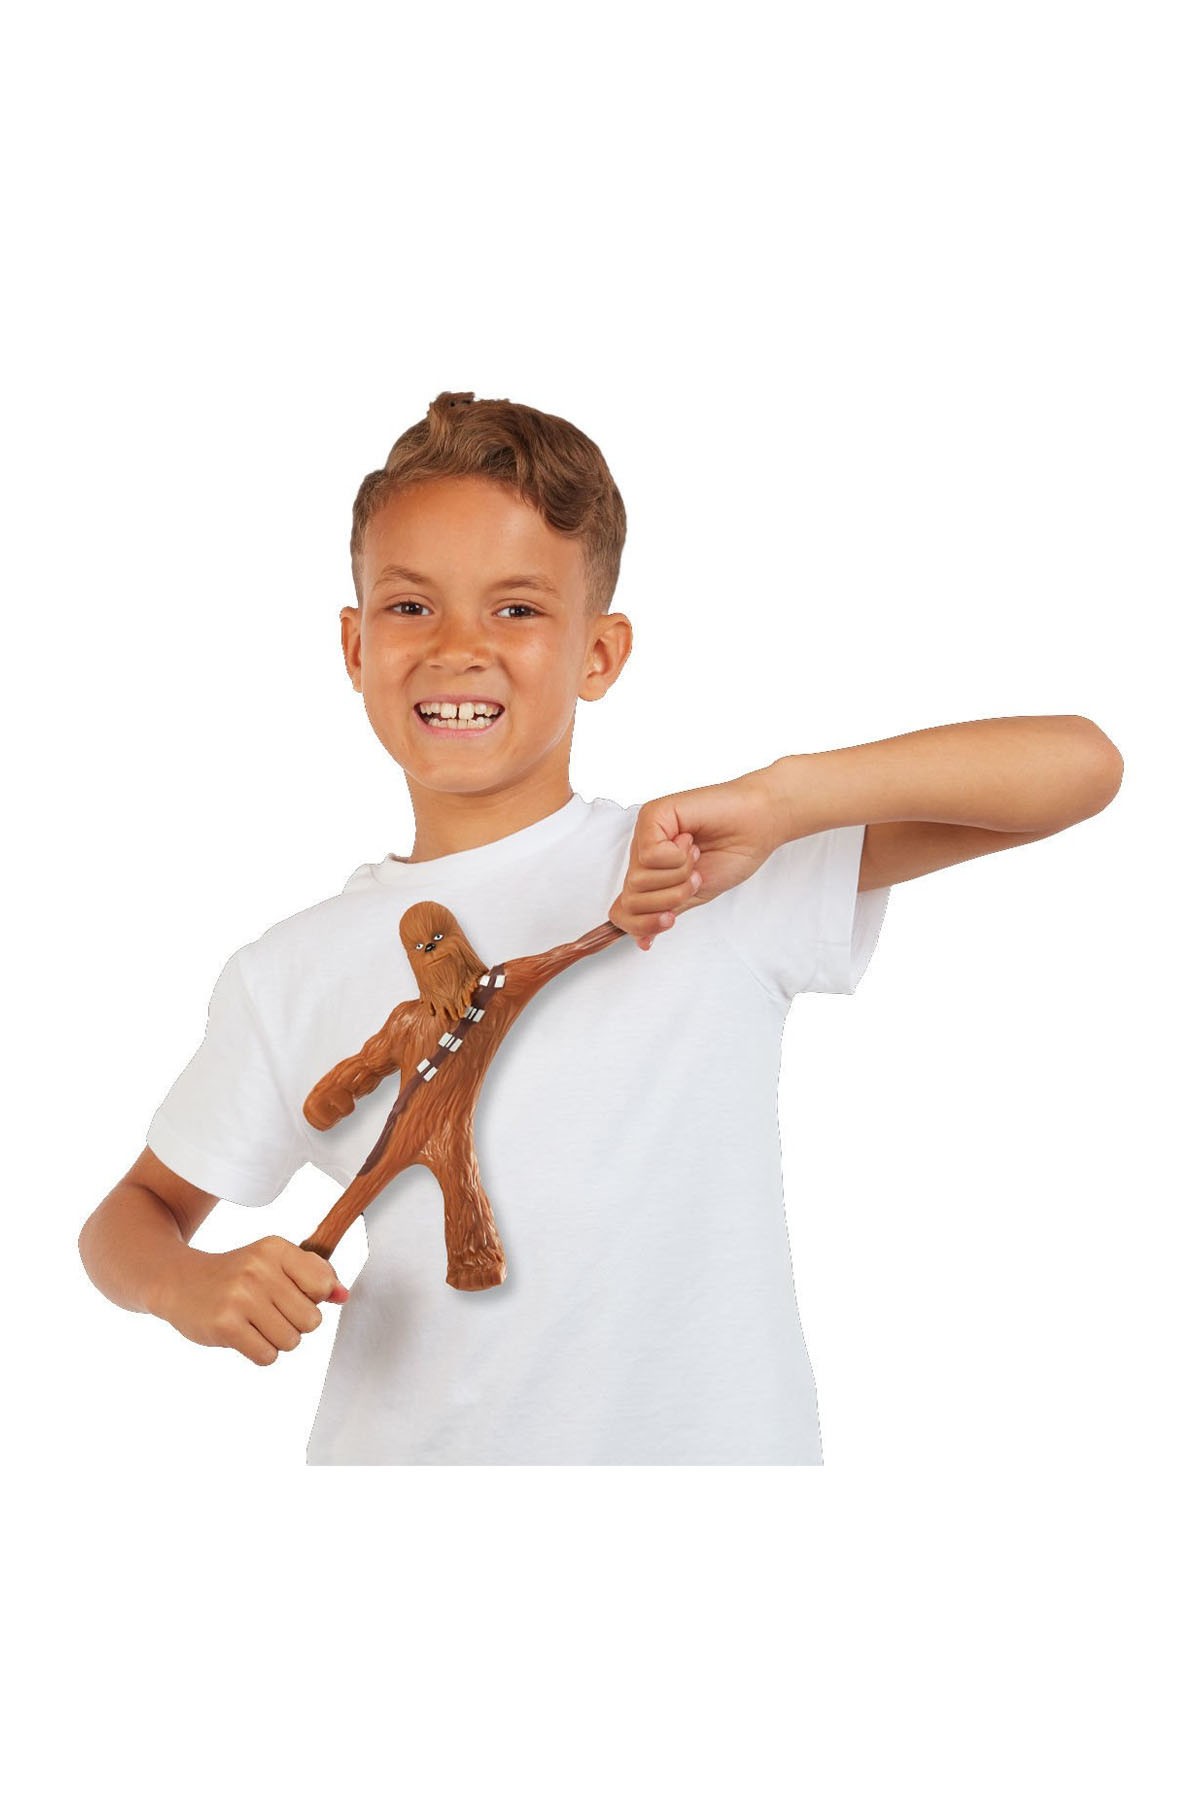 Stretch Armstrong Chewbacca 07692